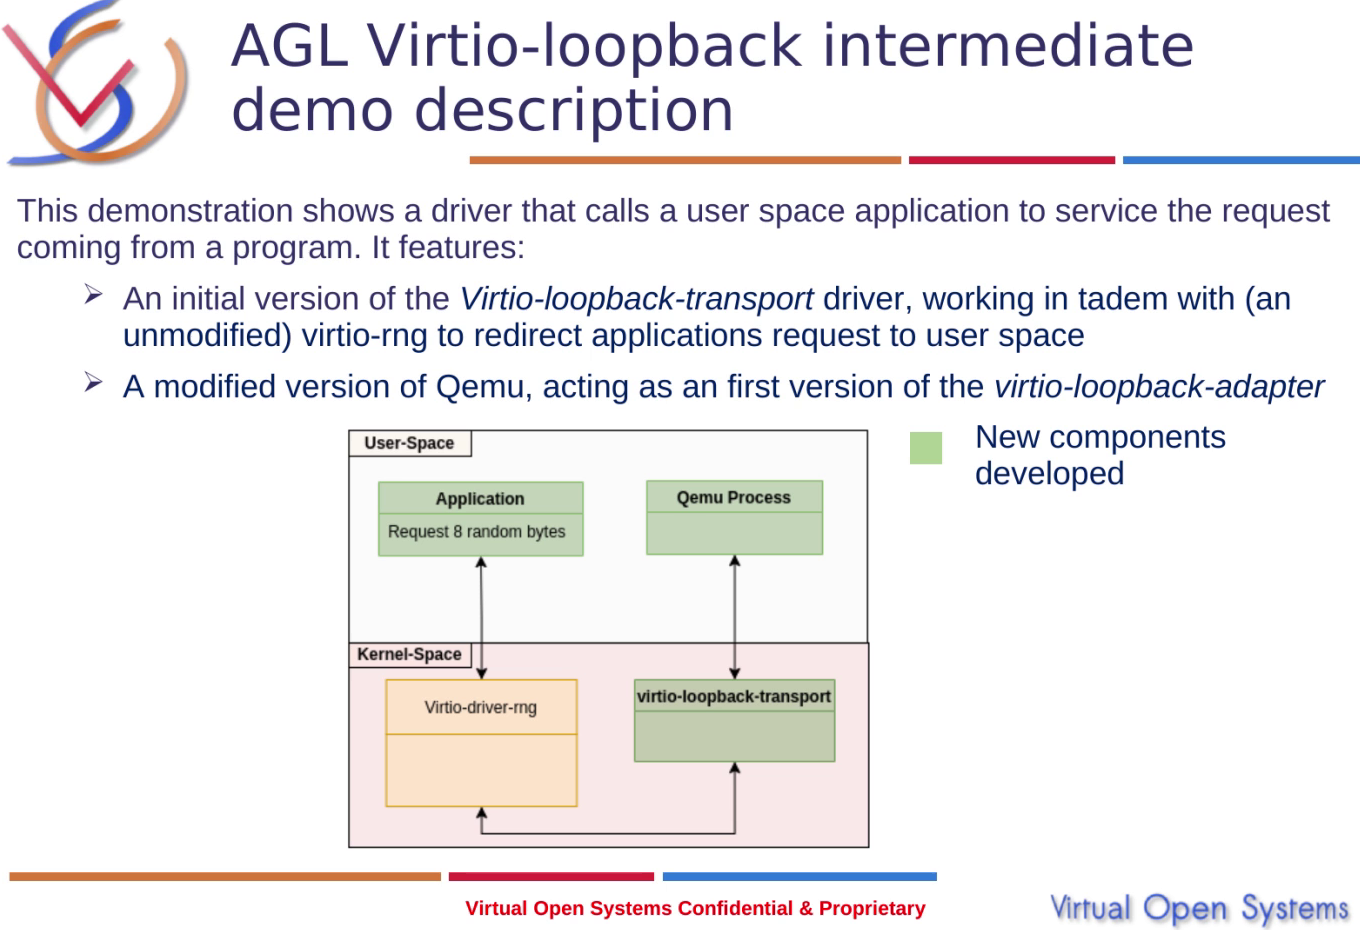 virtio-loopback runs applications transparently on native systems and hypervisors